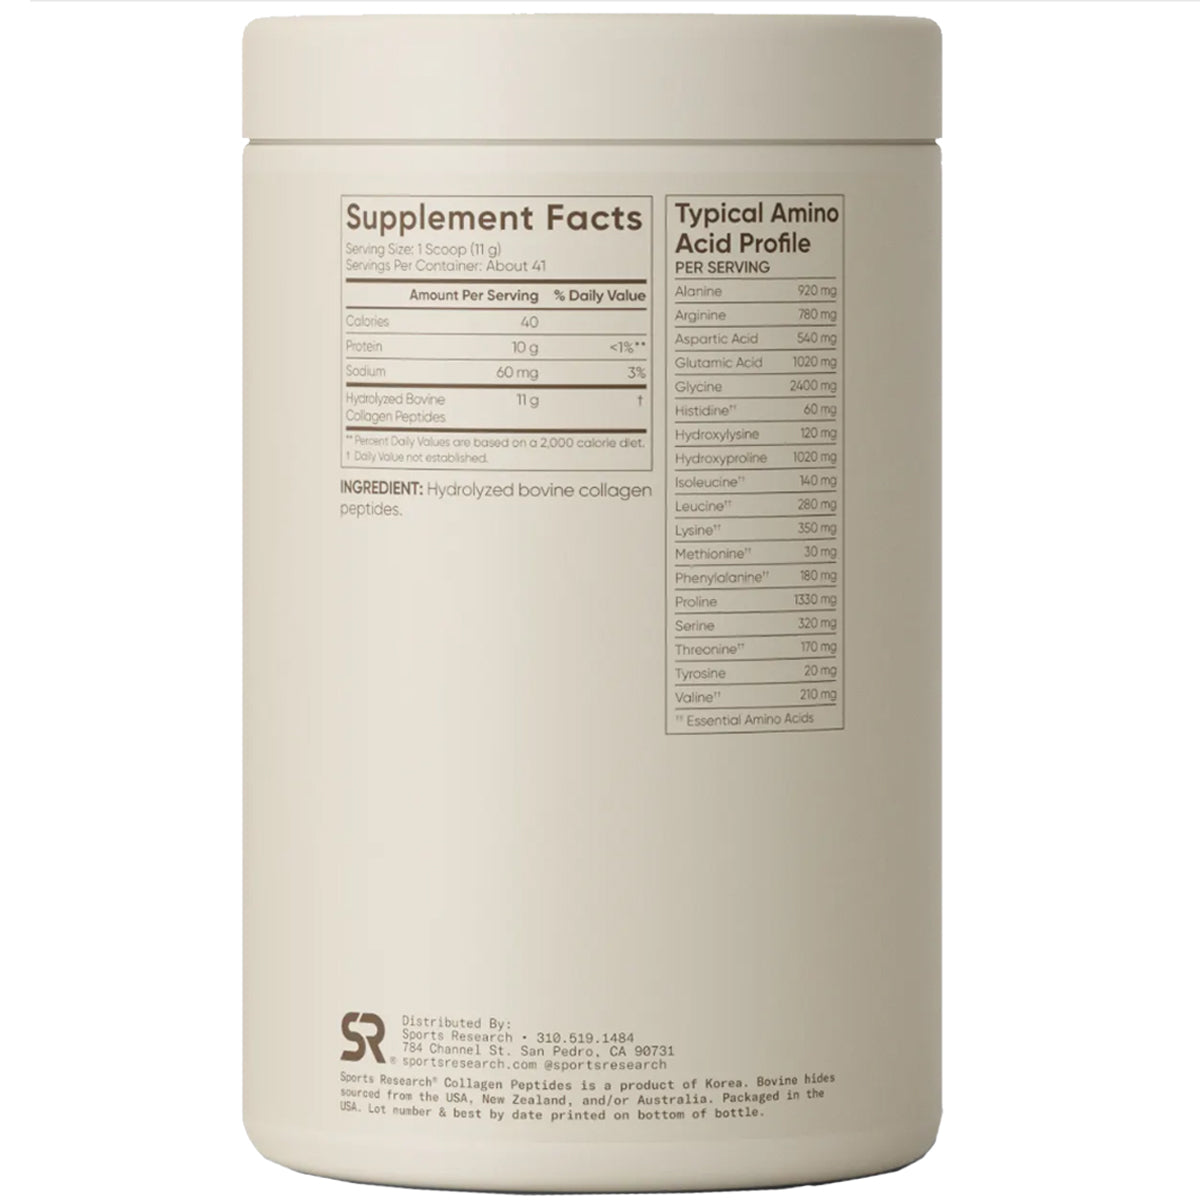 Sports Research Hydrolyzed Collagen Peptides Dietary Supplement - Unflavored Sports Research